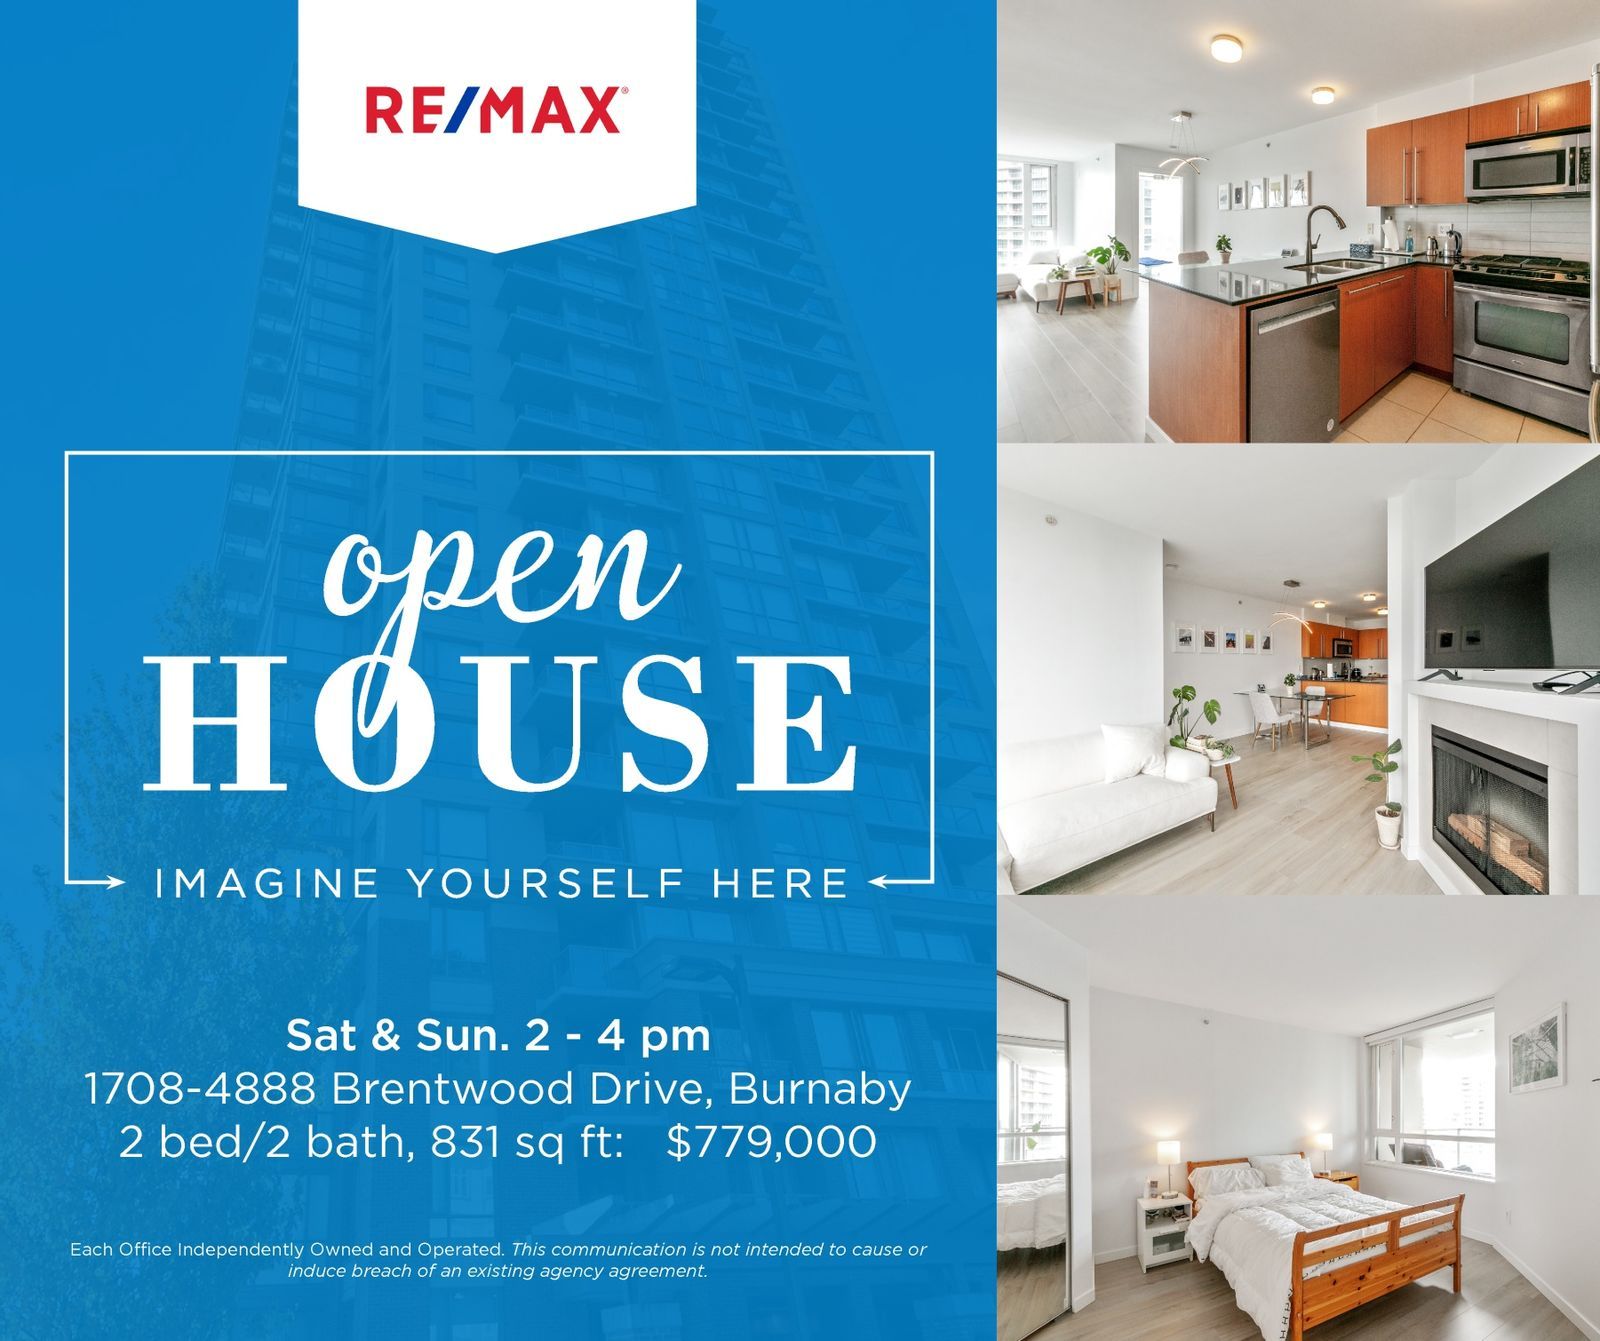 OPEN HOUSE today, 2-4 pm: 1708-4888 Brentwood Dr, Burnaby